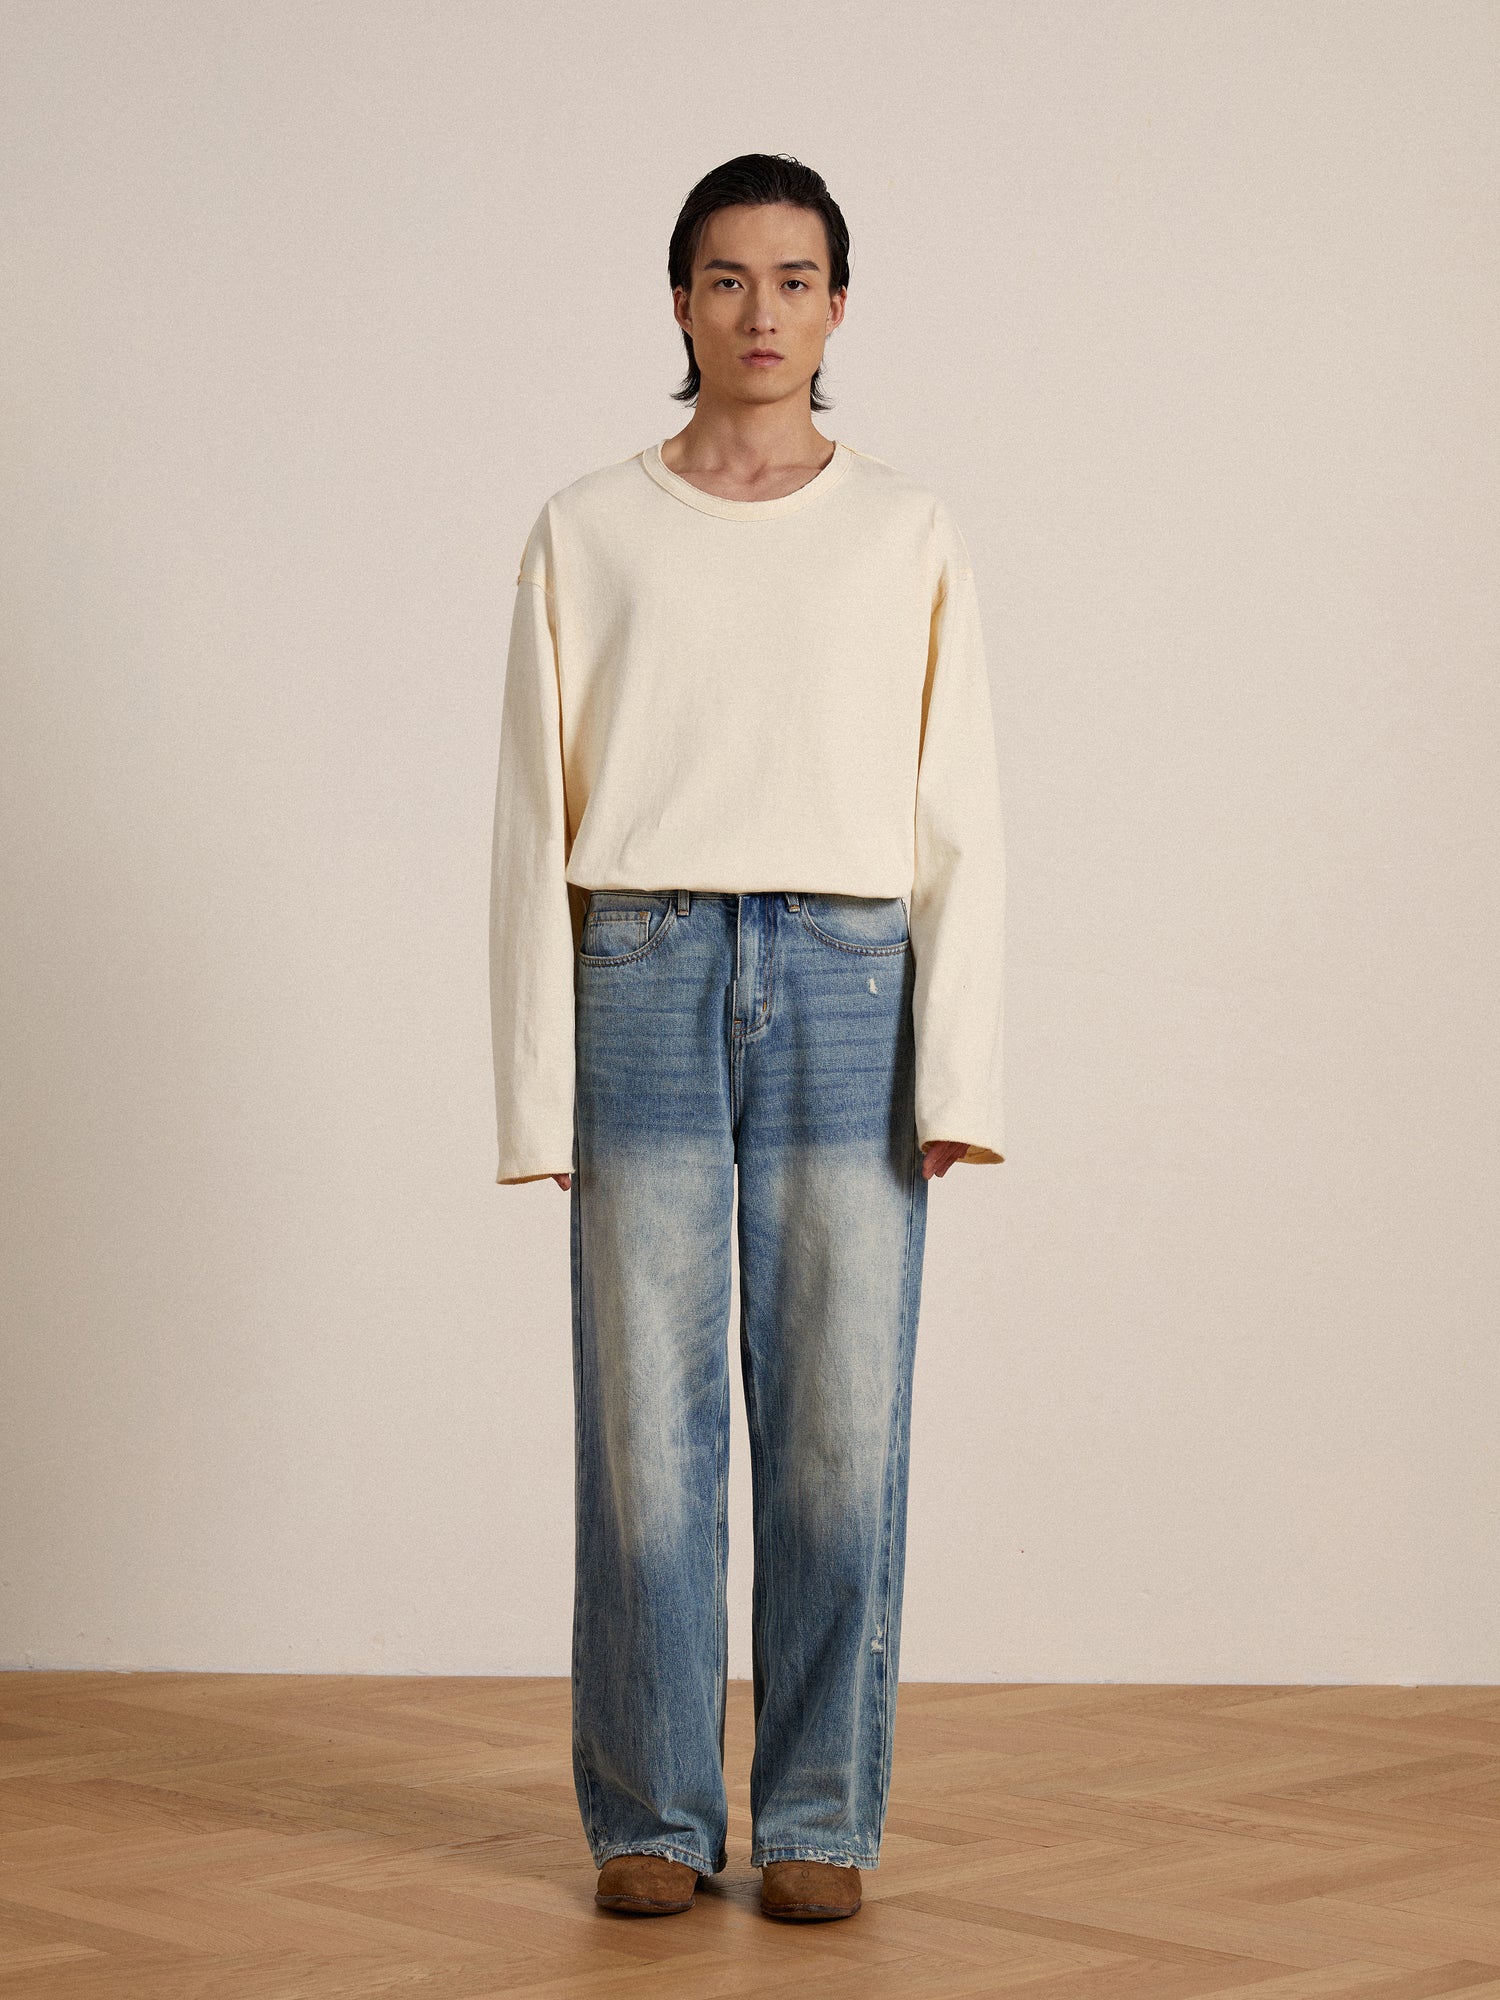 The model is wearing a white Profound Reversed LS Tee with reversed seams and blue jeans.